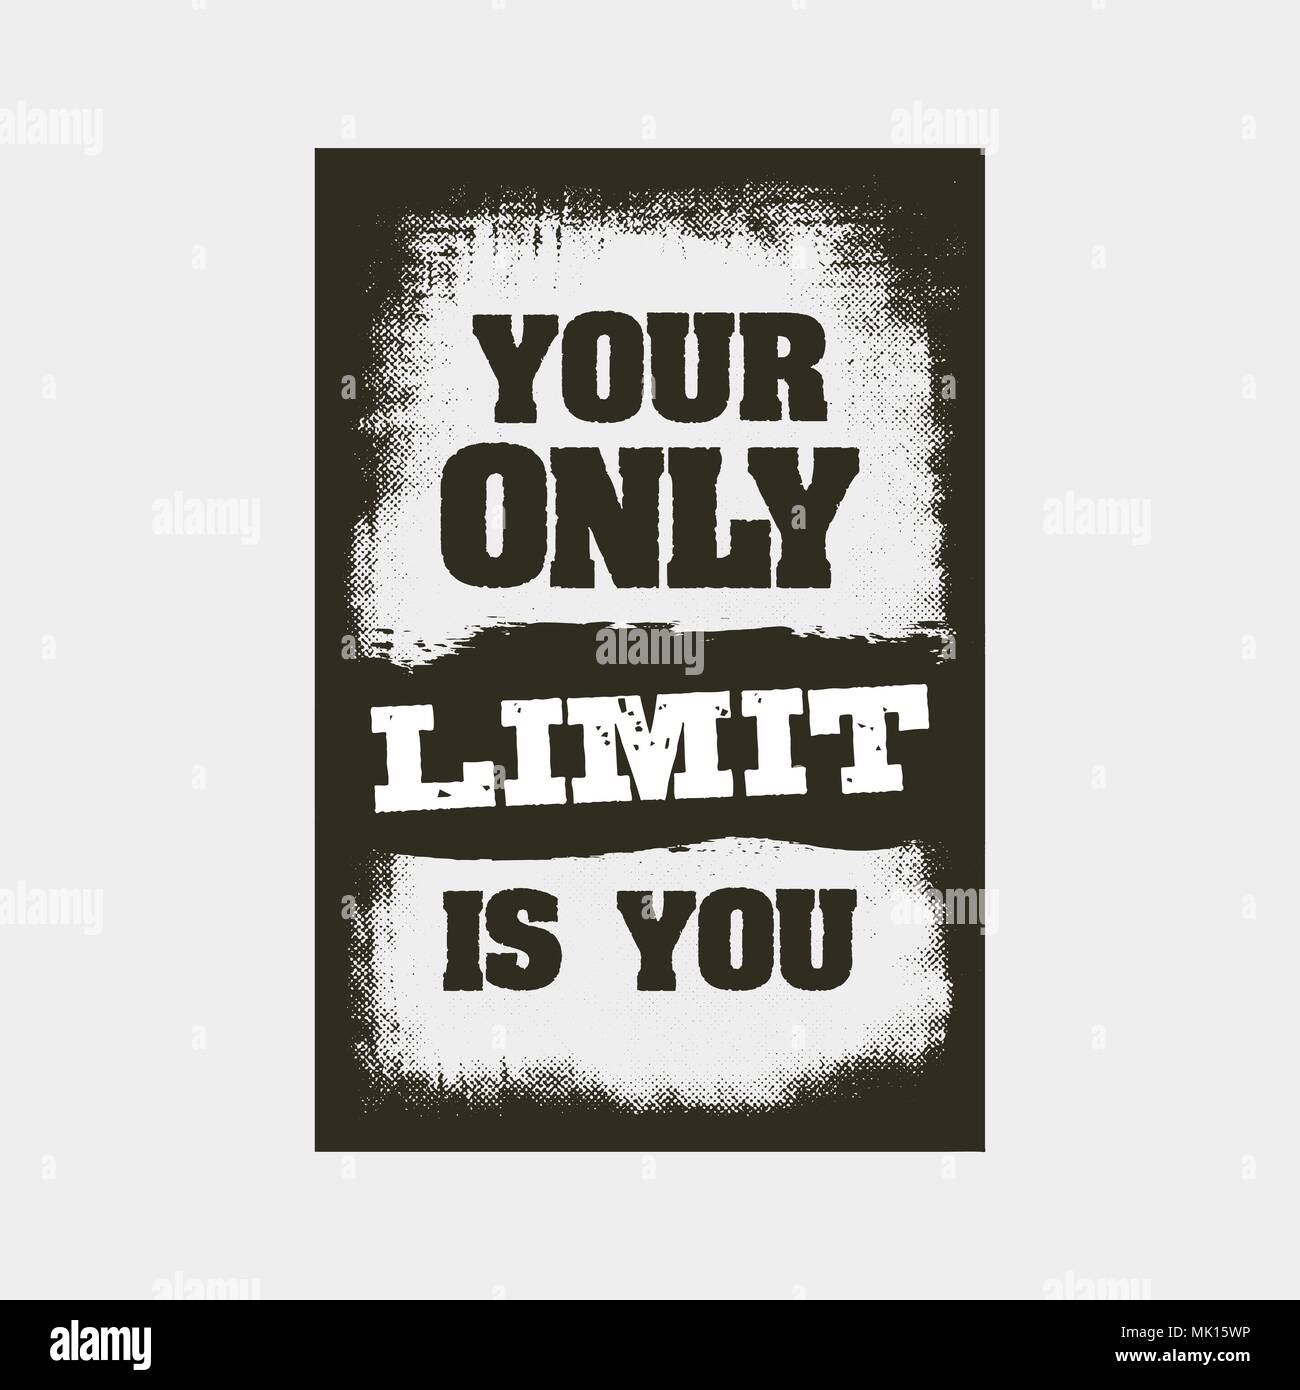 Your only текст. Your only. You are your only limit футболка. Грандж постеры. You only limit is you.